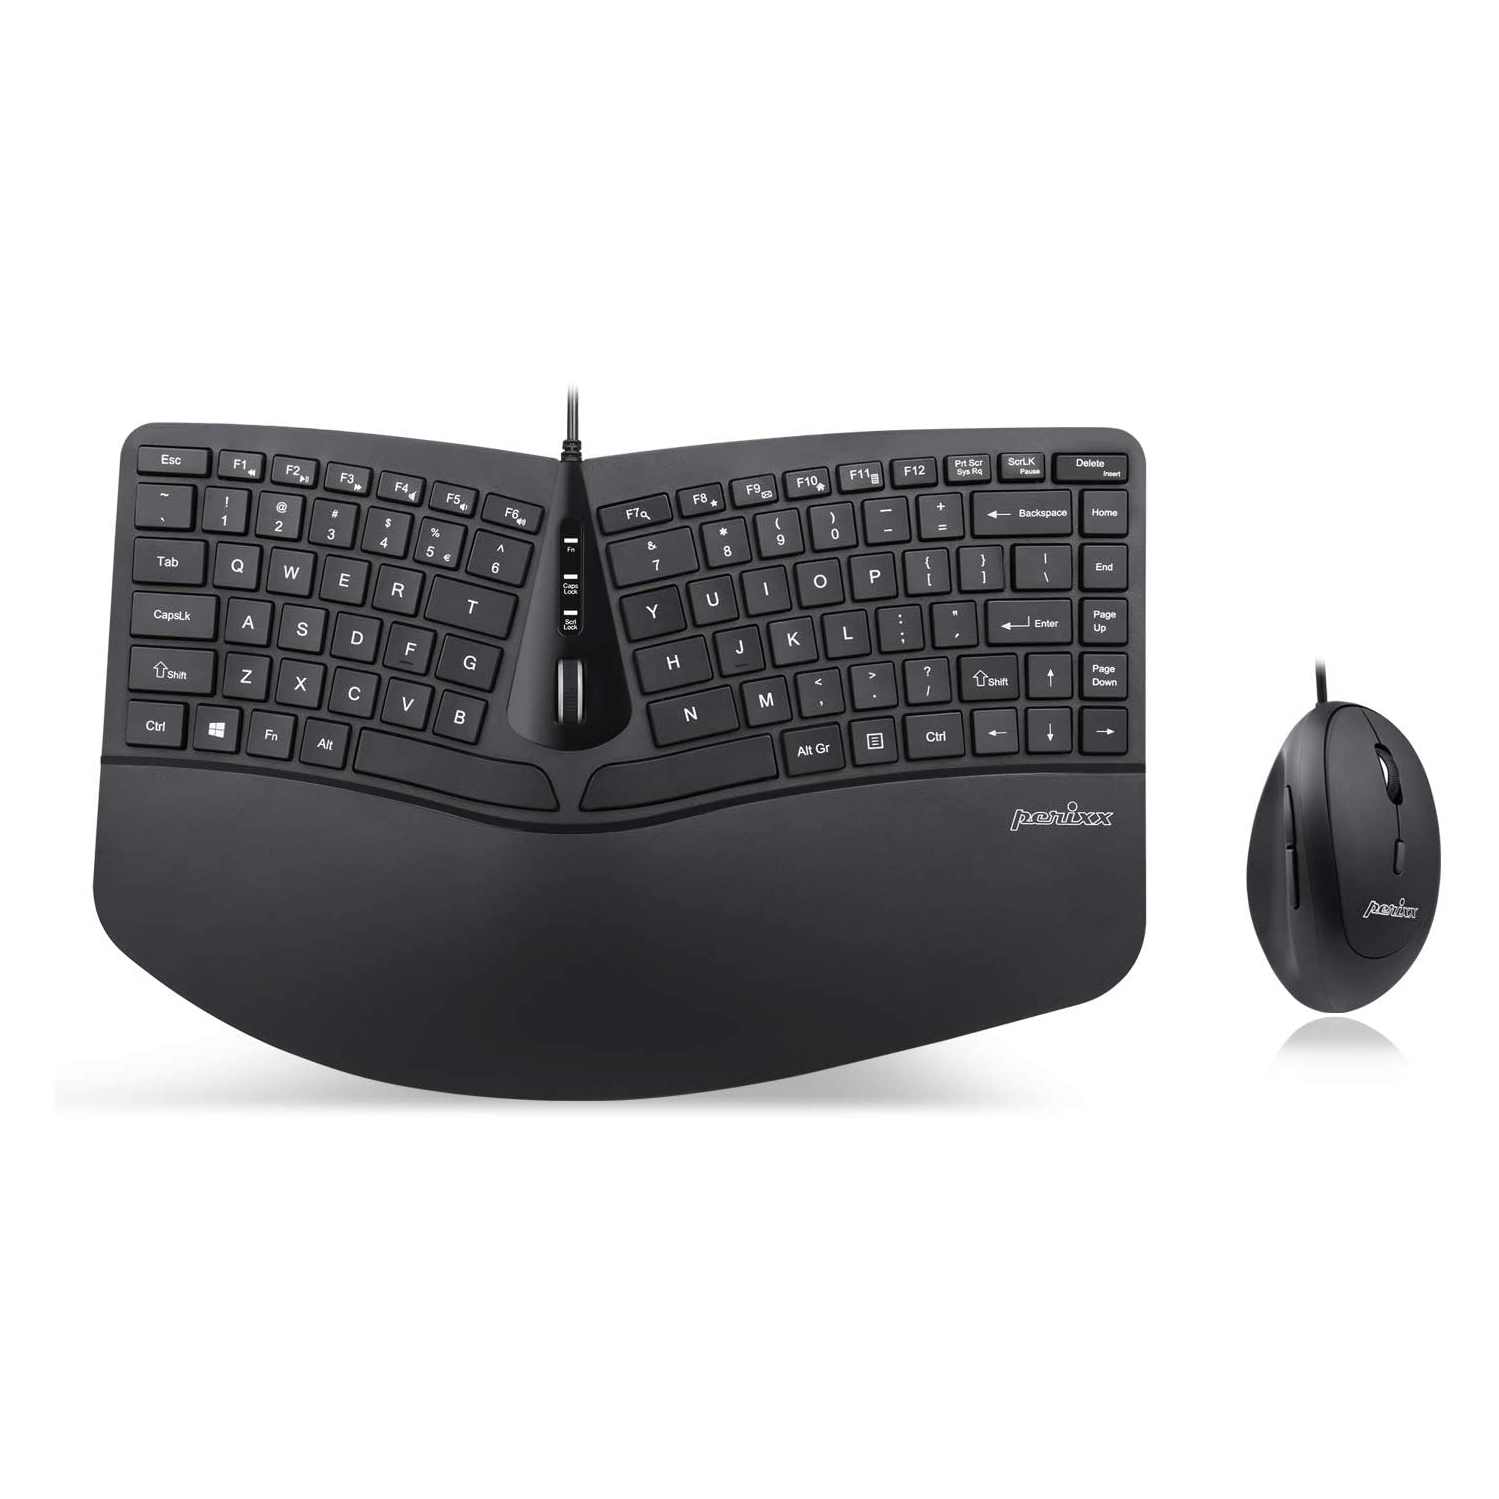 PERIDUO-406, Wired Compact Ergonomic Split Design Keyboard and Vertical Mouse Combo, Keyboard with Adjustable